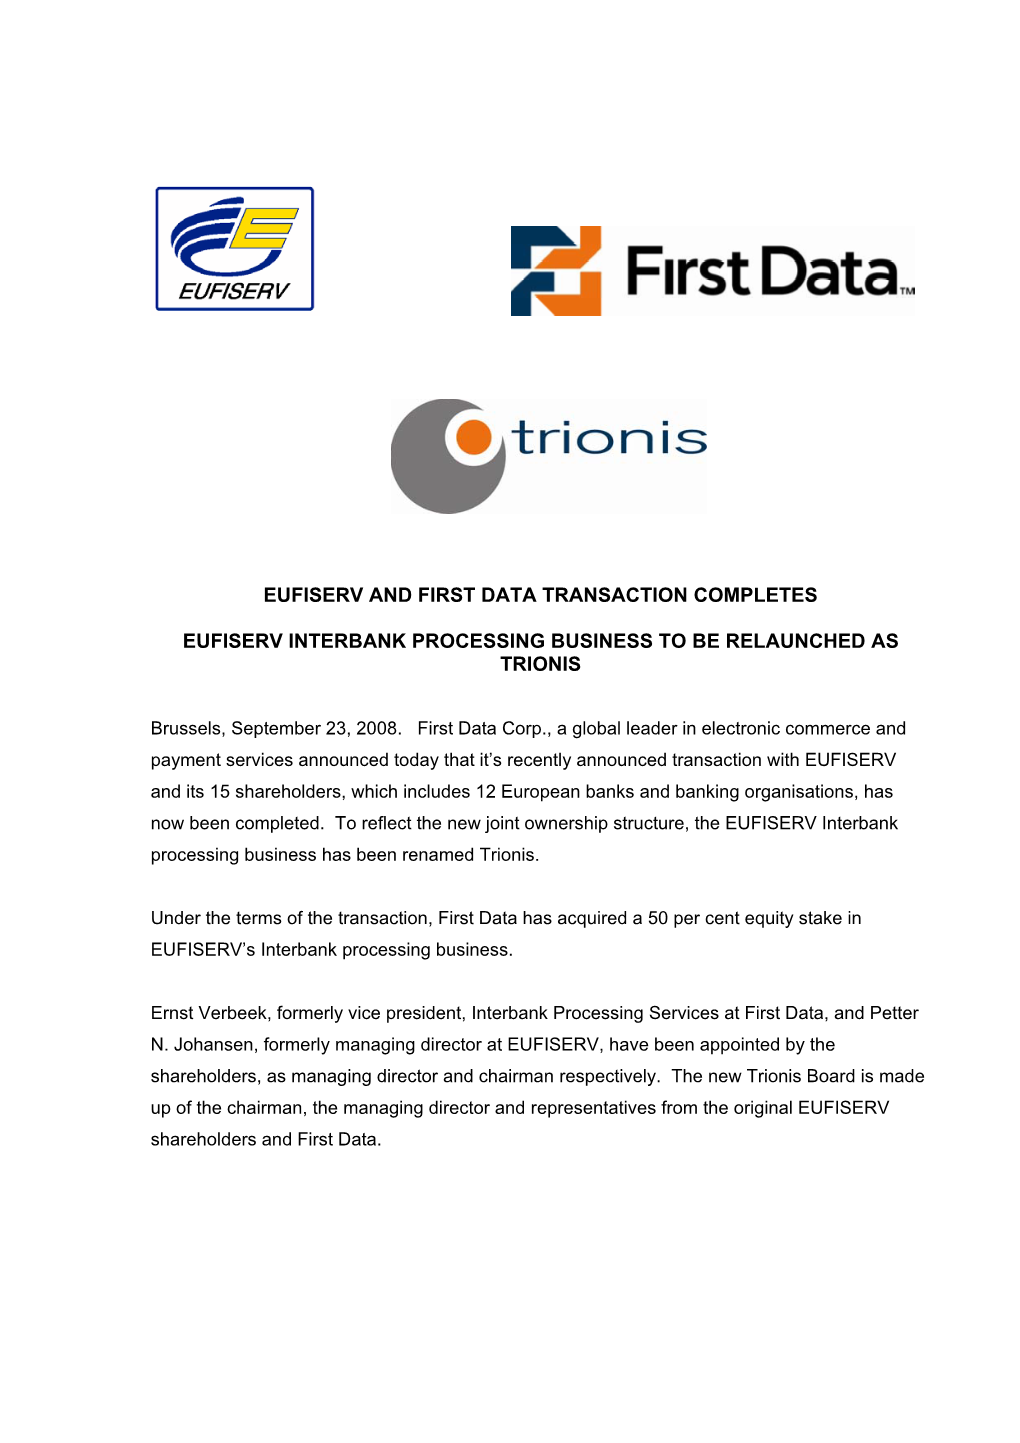 Eufiserv and First Data Transaction Completes